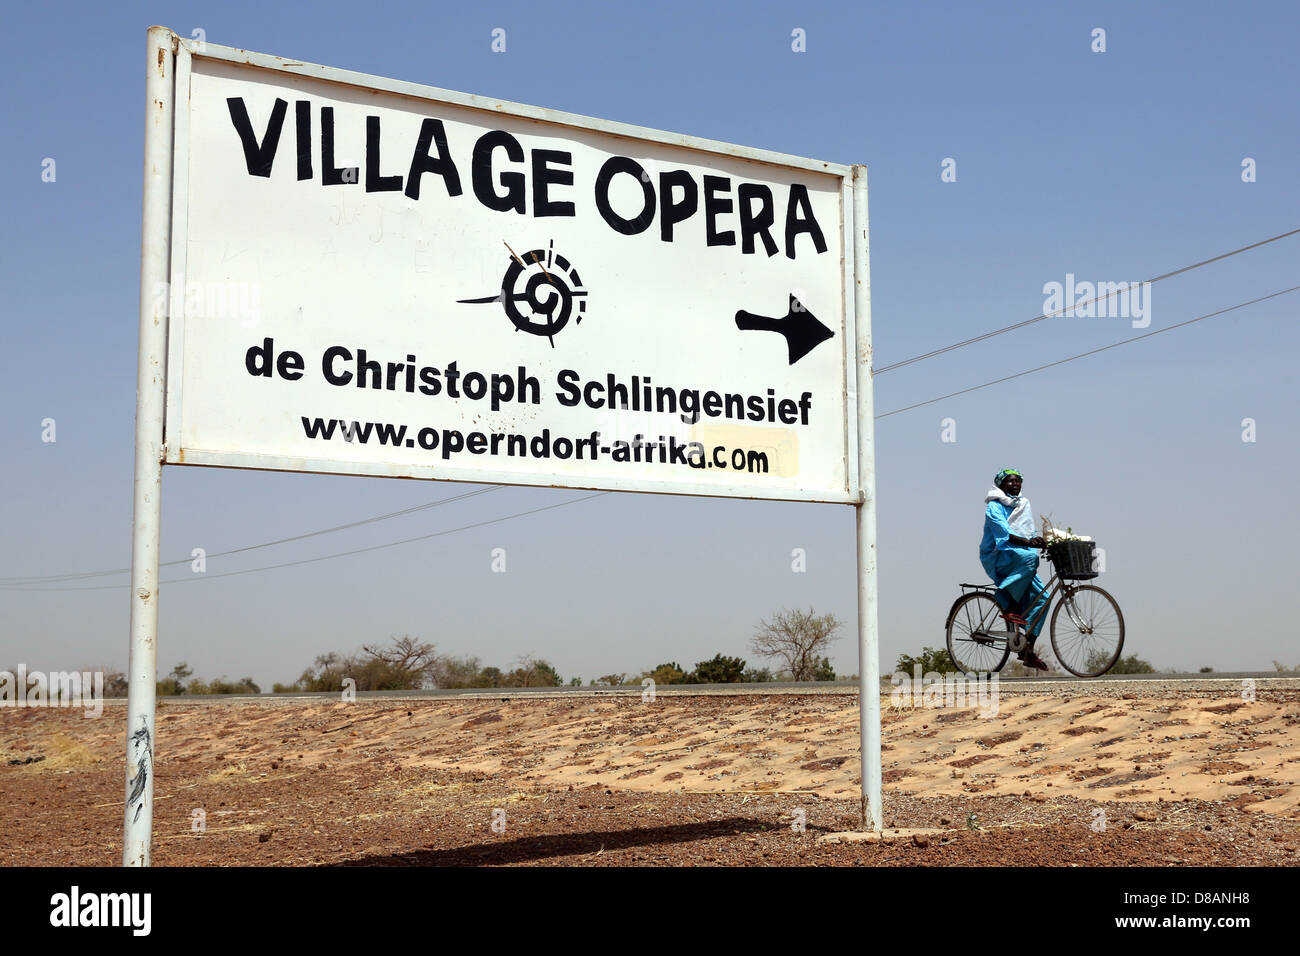 sign to the Opera Village of the film director and theater director late in 2010 Christoph Schlingensief. Stock Photo